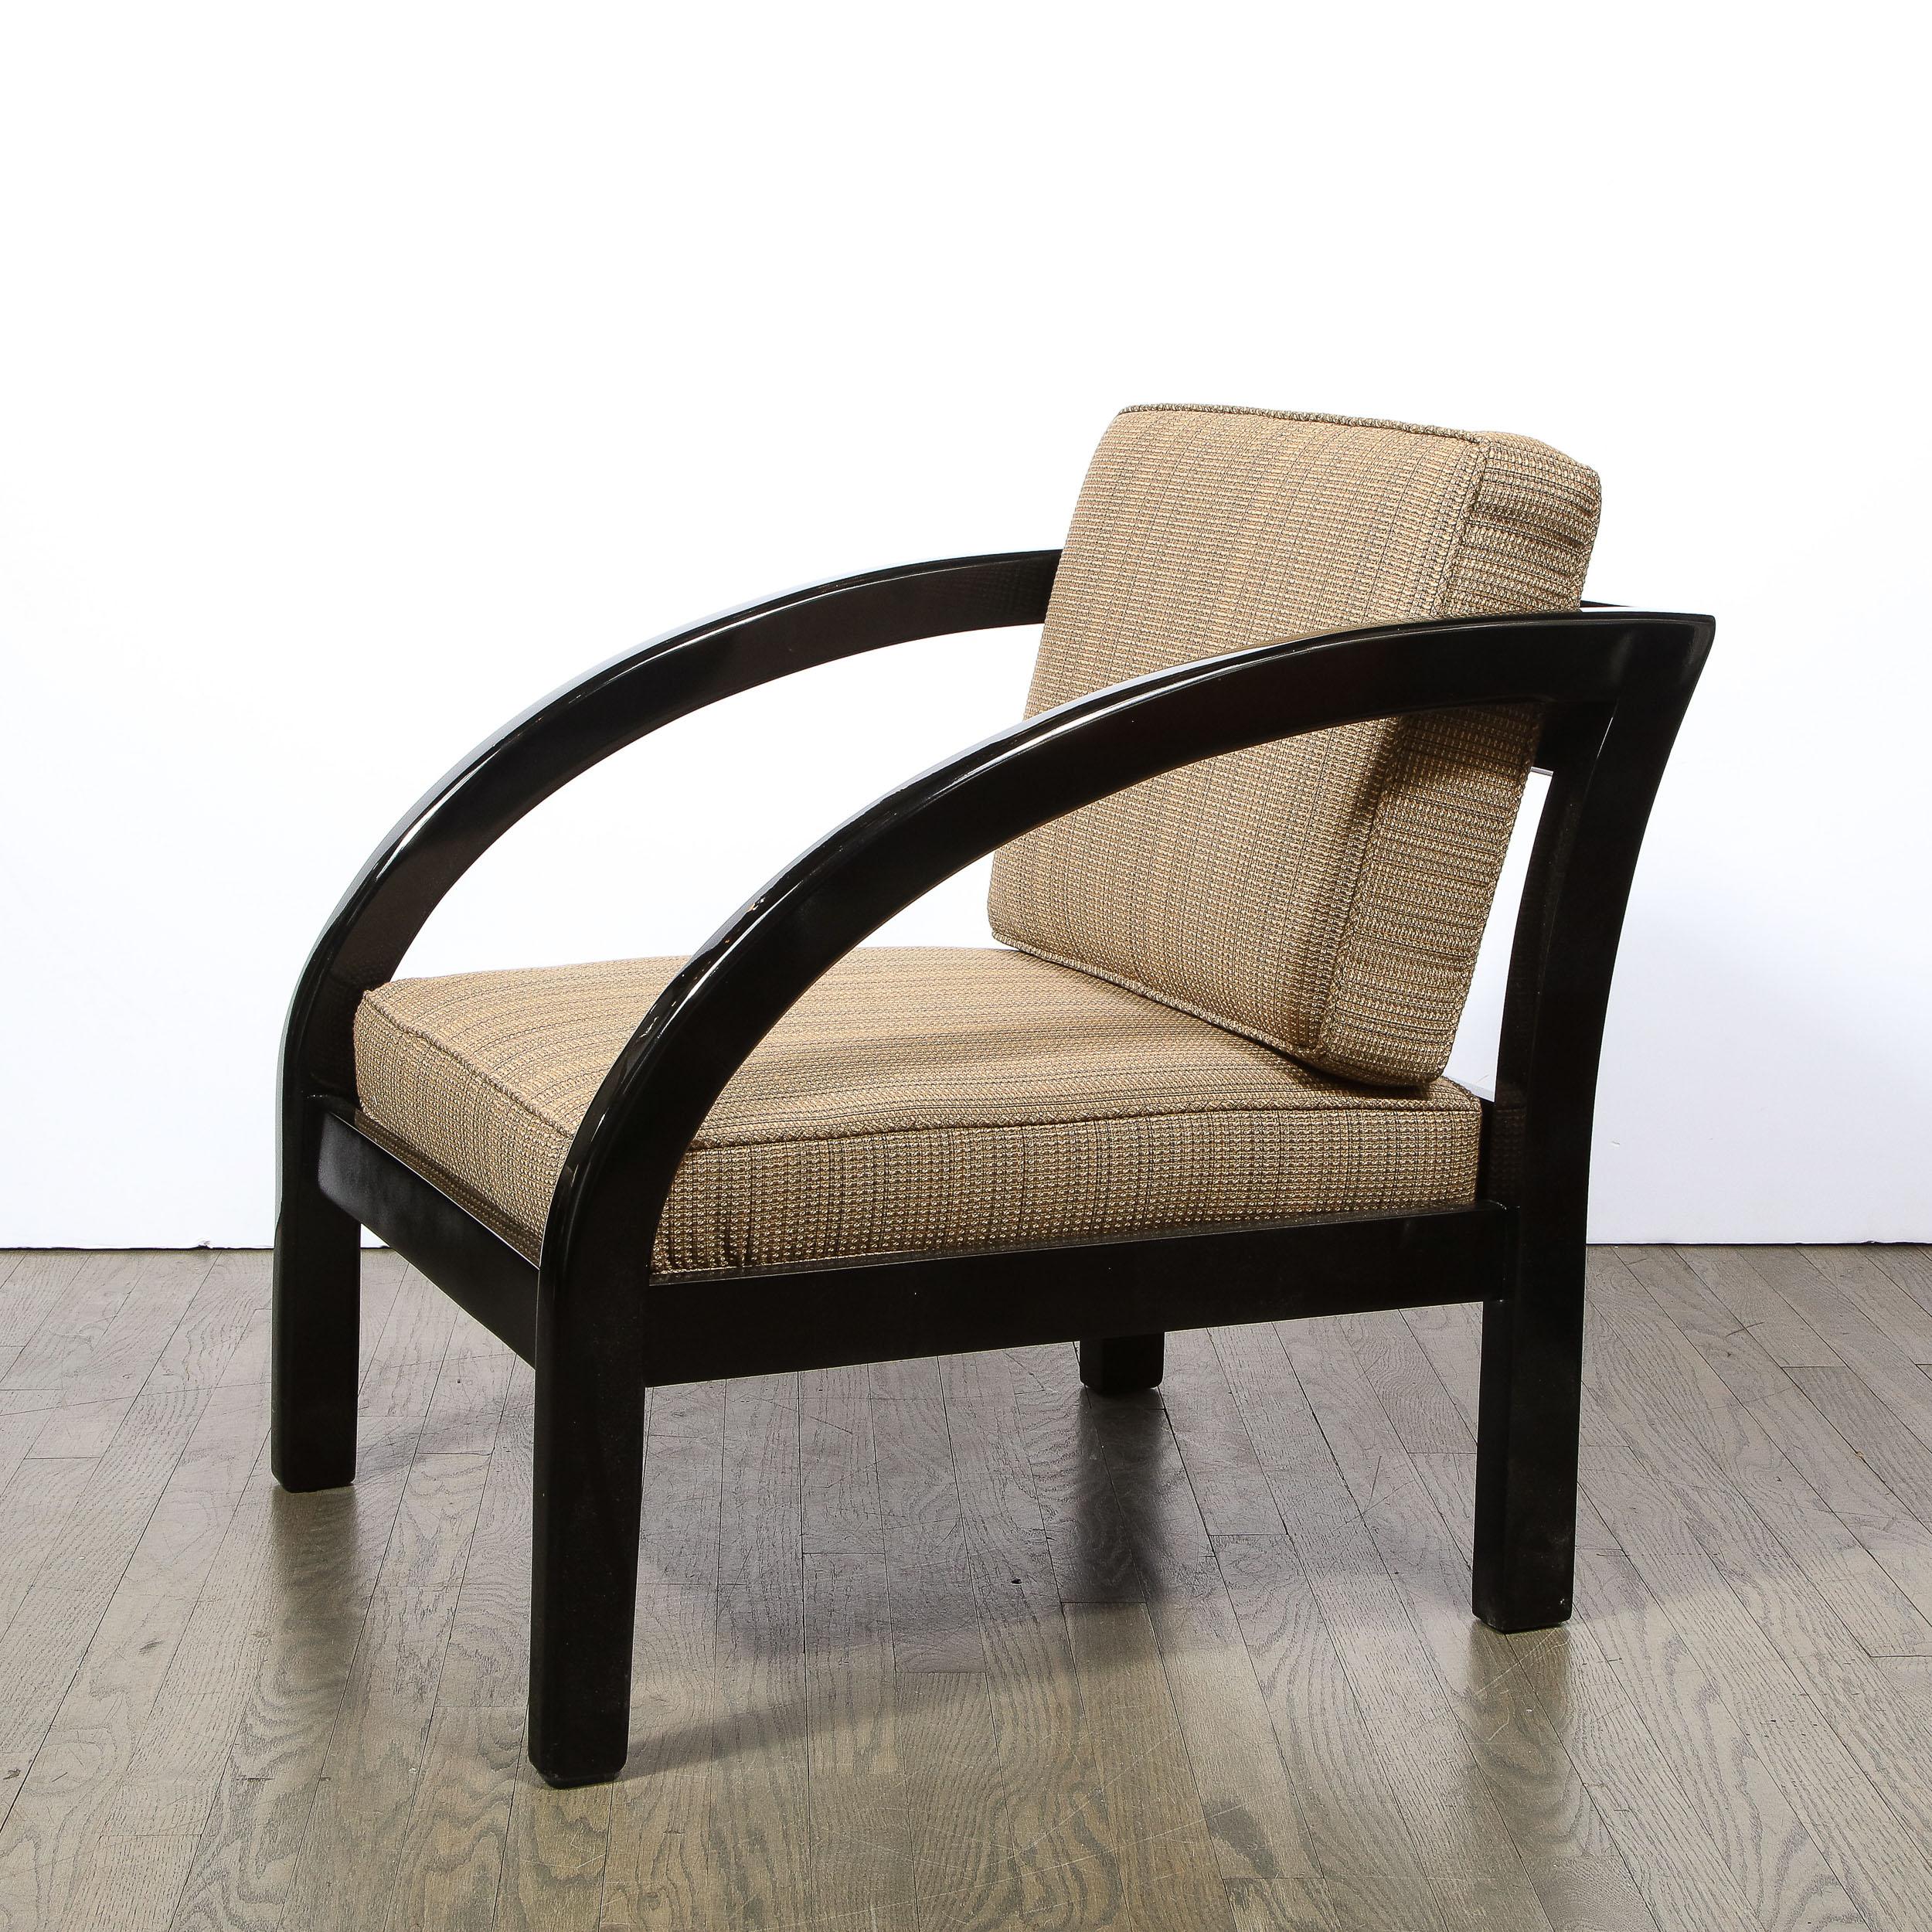 American Art Deco Black Lacquer Streamlined Armchair by Modernage Furniture Company For Sale